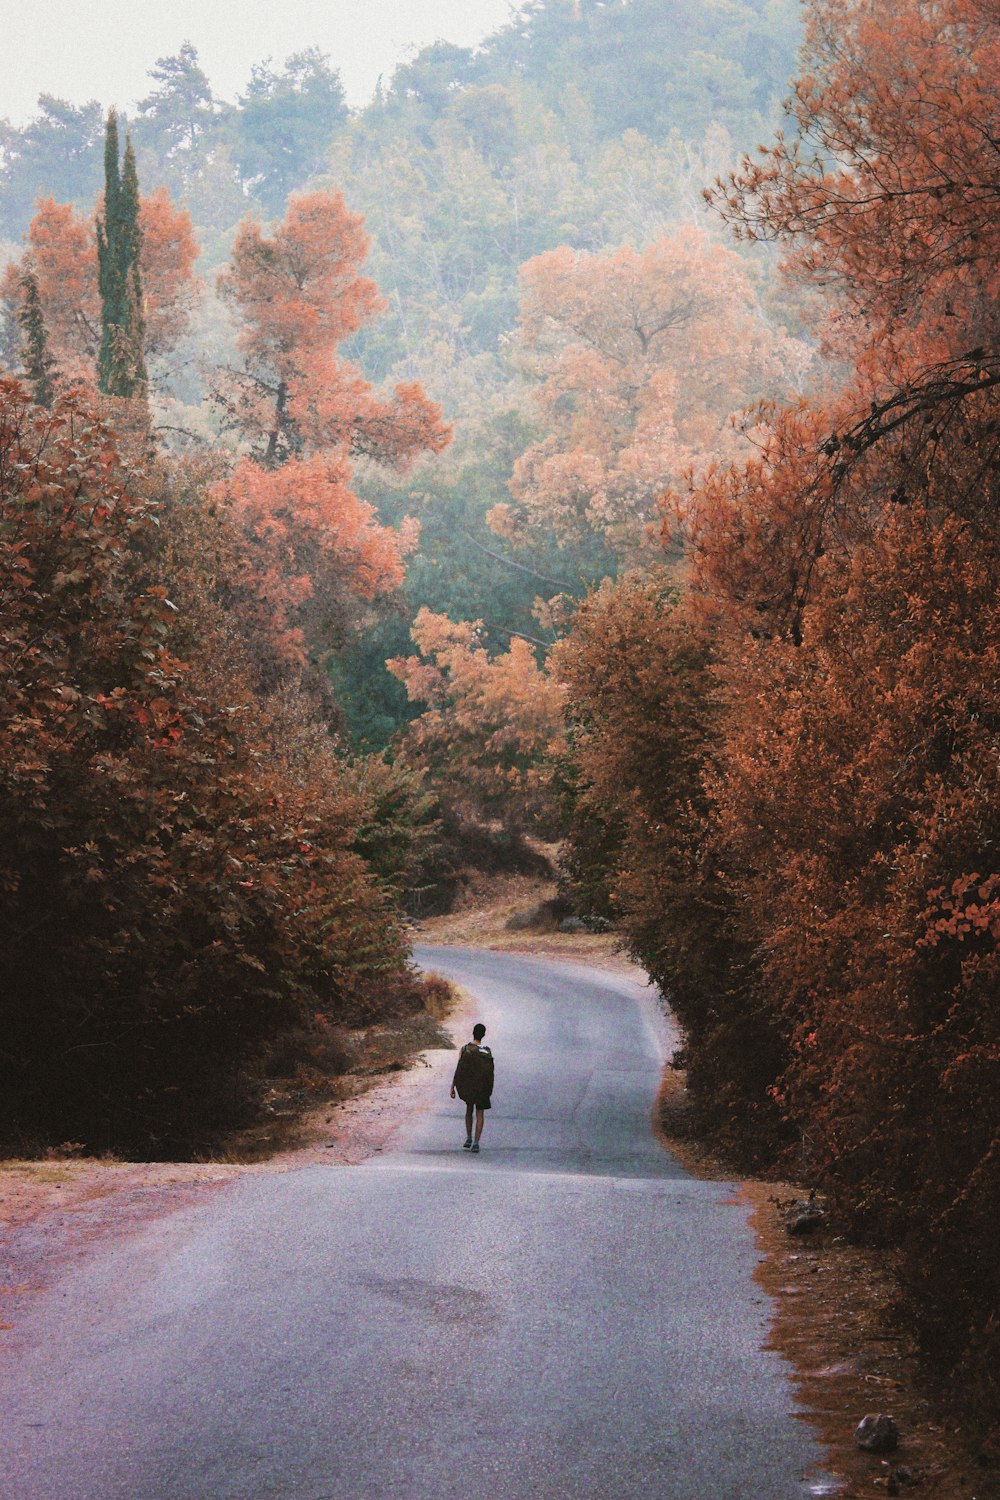 a person walking down a road surrounded by trees